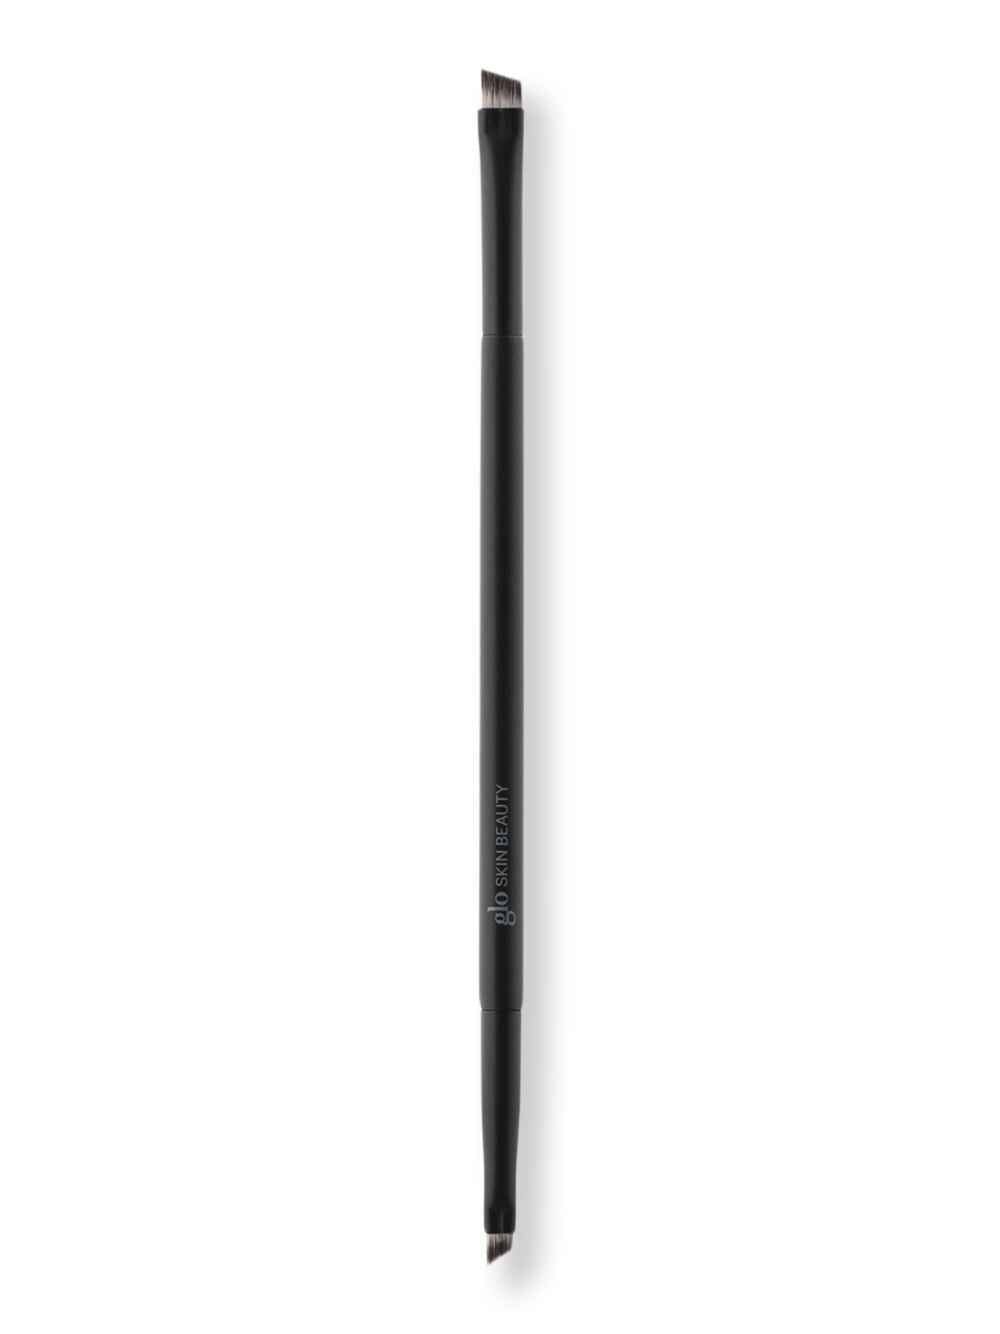 Glo Glo 309 Dual Brow Liner Brush Makeup Brushes 